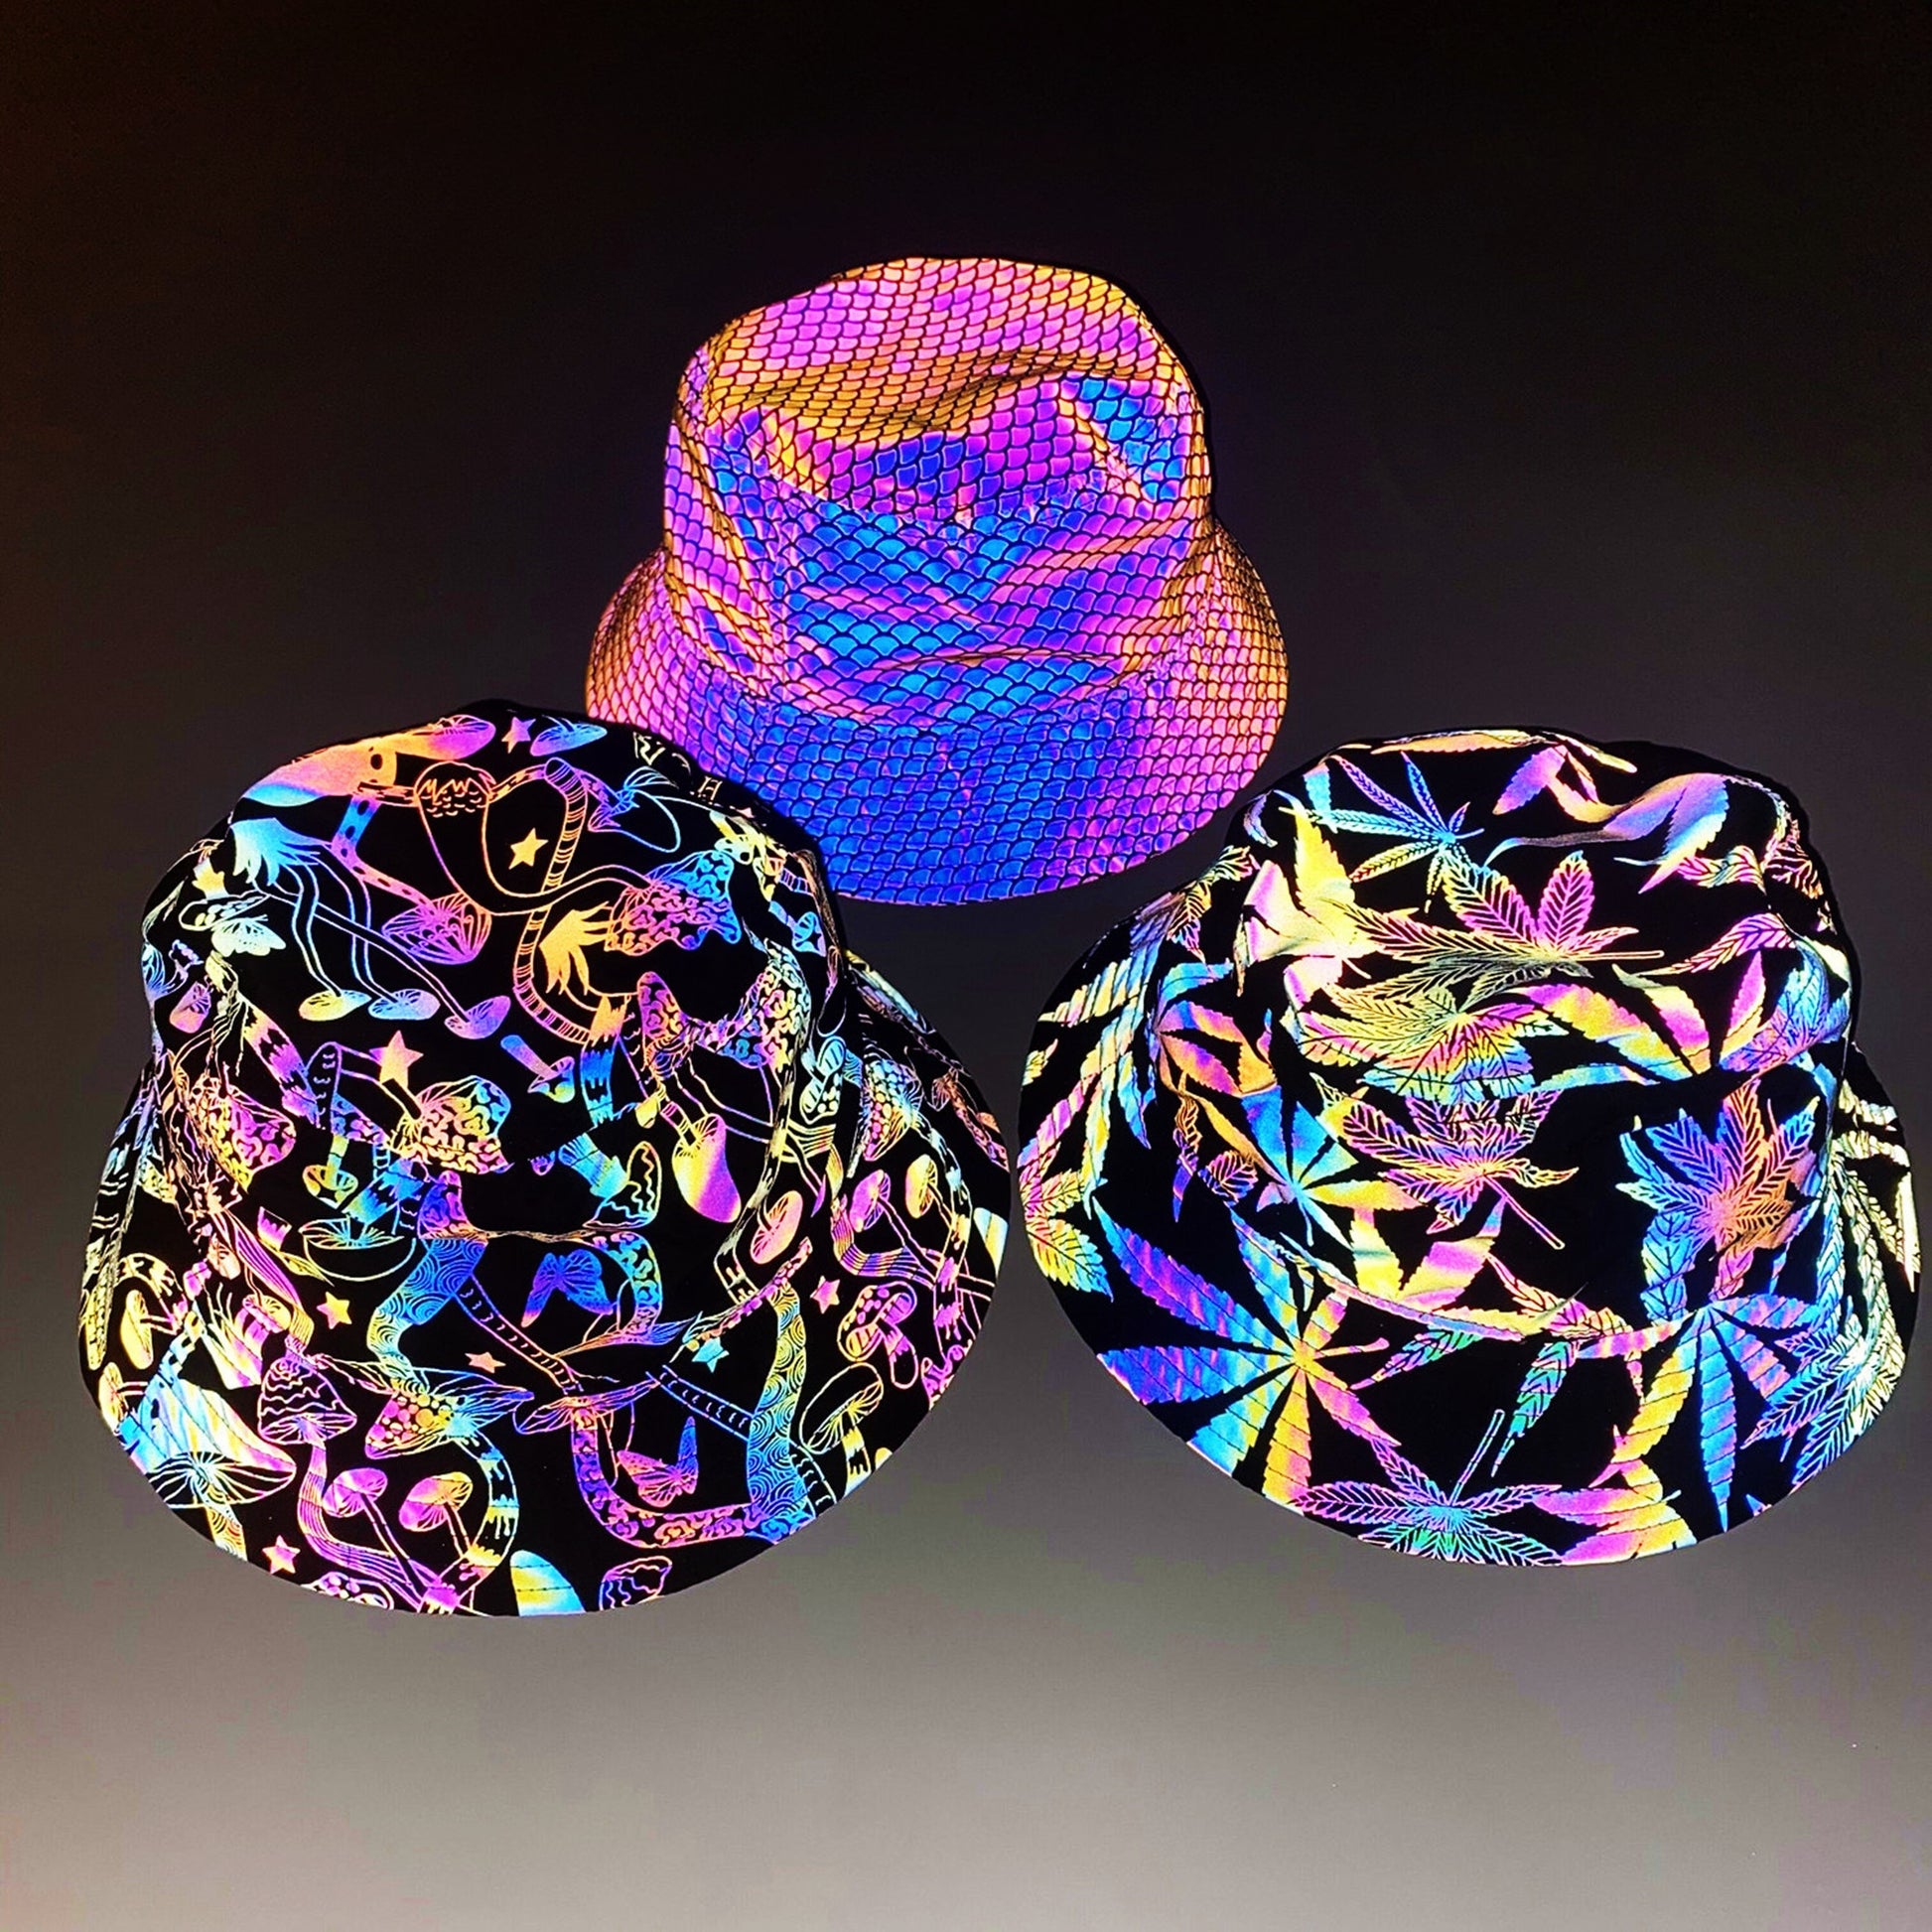 Holographic Reflective Unisex Bucket Hat Outdoor Summer Reflecting Cap Head Cover - Rave, Festival, Party, Concert - GOLDEN TOUCH APPARELS WOMEN